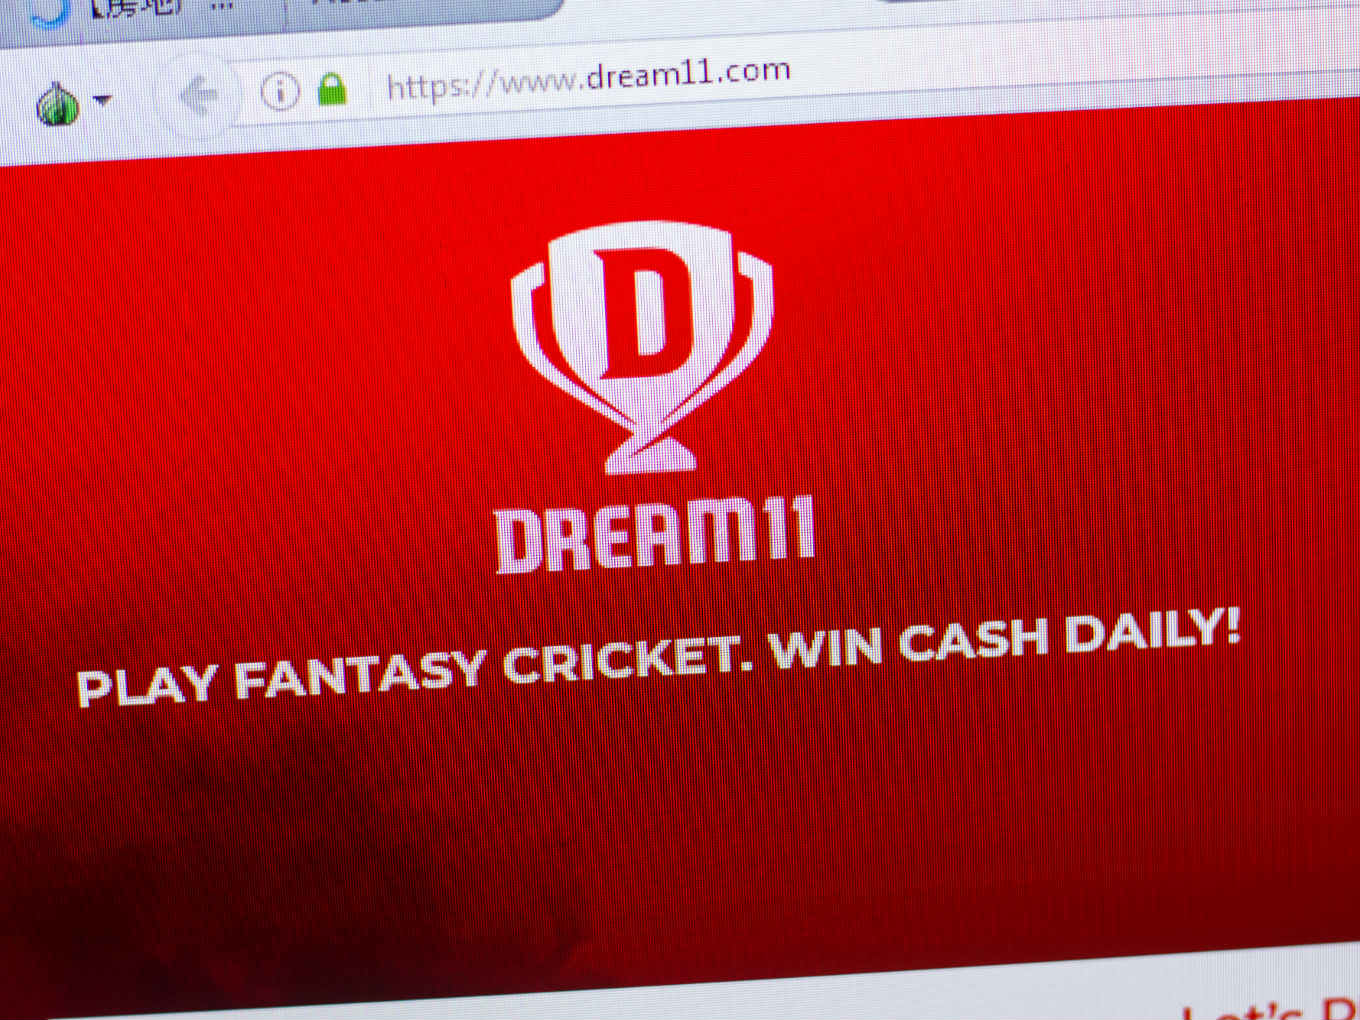 Ahead Of IPL 2020, Dream11 Close To $500 Mn Funding From Tiger Global